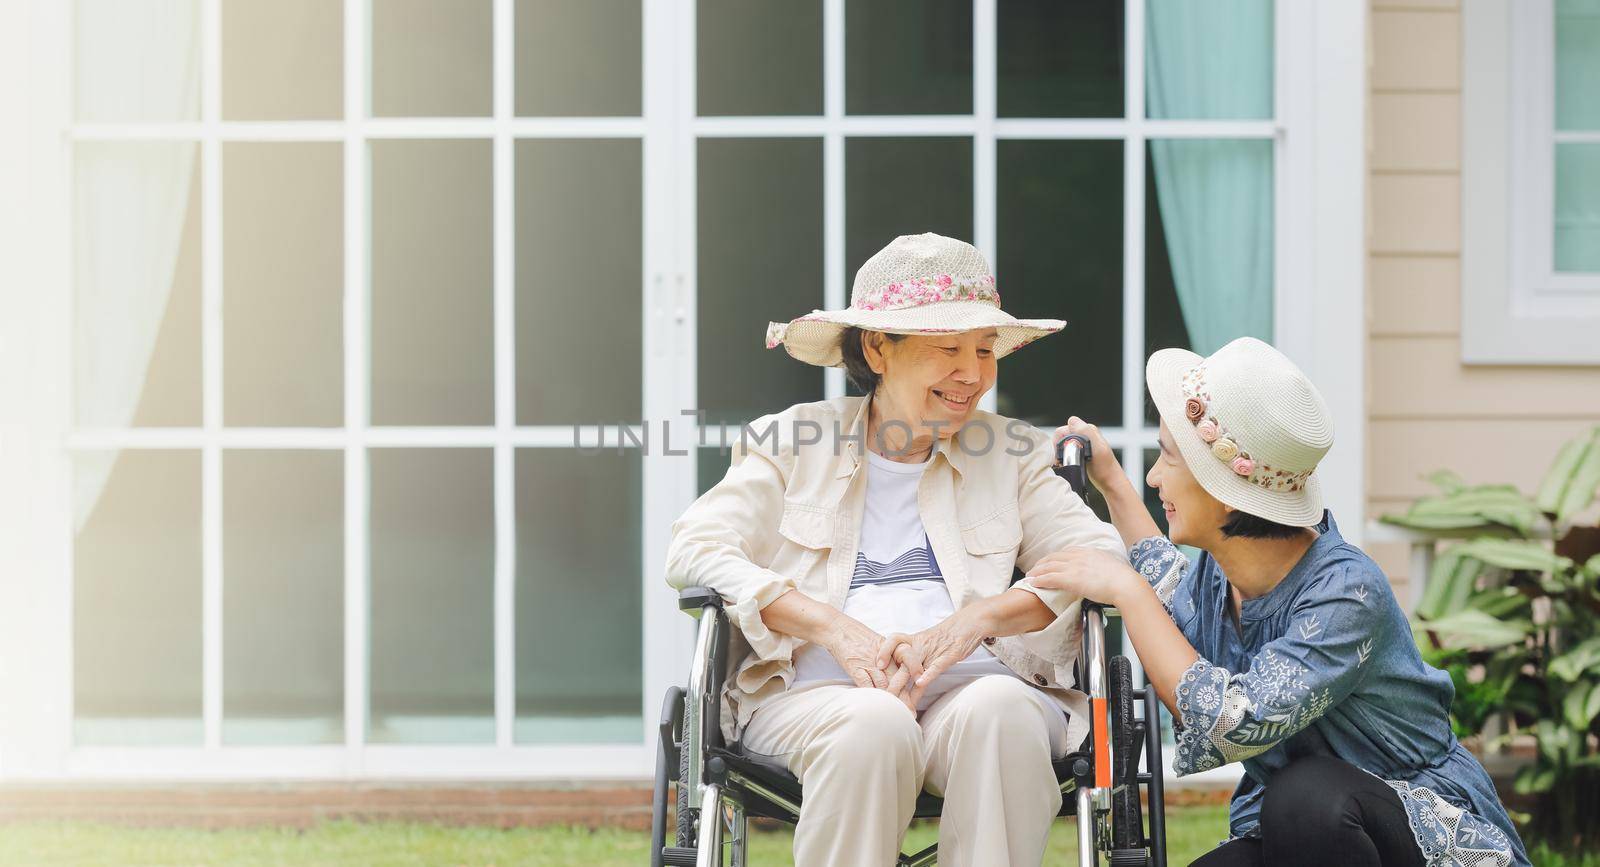 Elderly woman relax on wheelchair in backyard with daughter